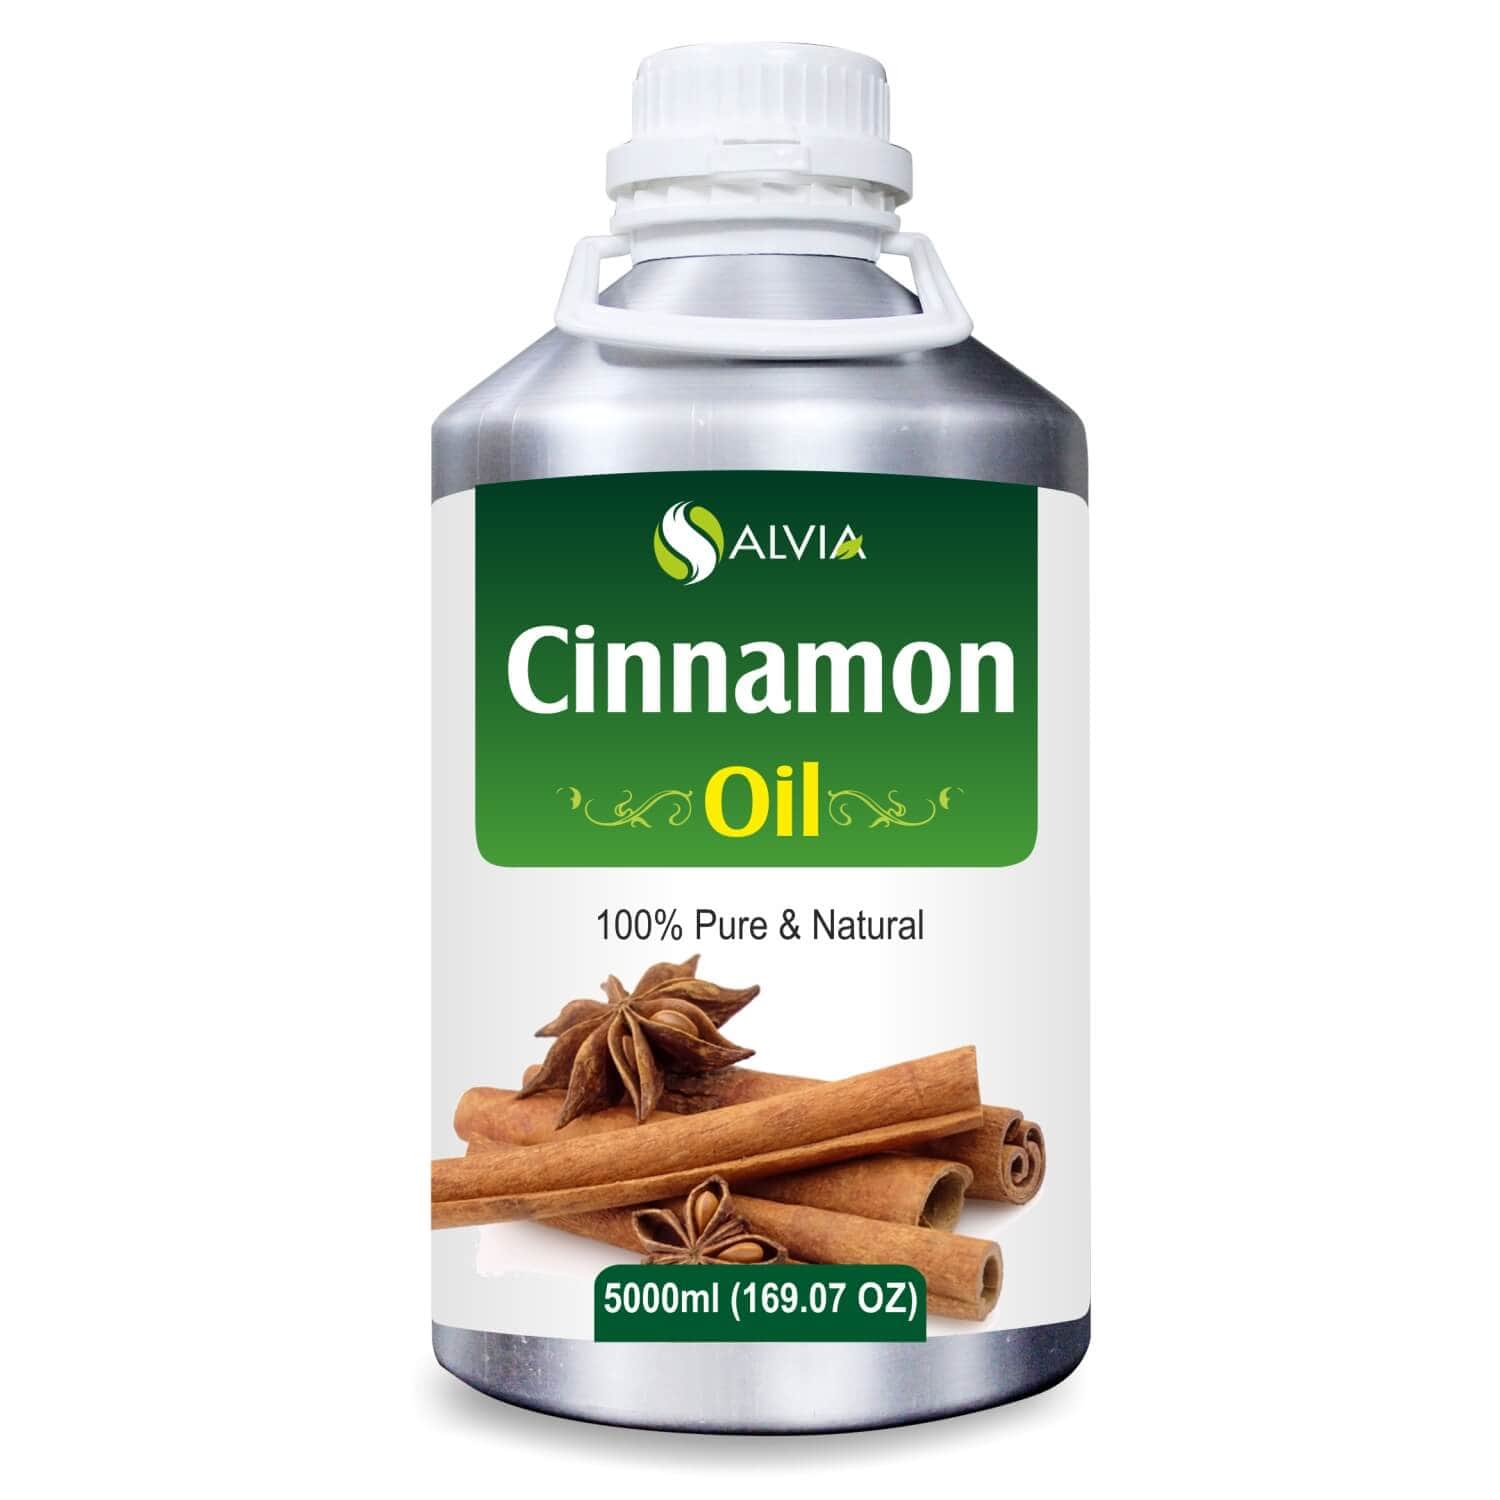 Salvia Natural Essential Oils 5000ml Cinnamon Oil (Cinnamomum verum) 100% Natural Pure Essential Oil Promotes Hair Growth, Aromatherapy, Antioxidant Properties, Relieves Pain